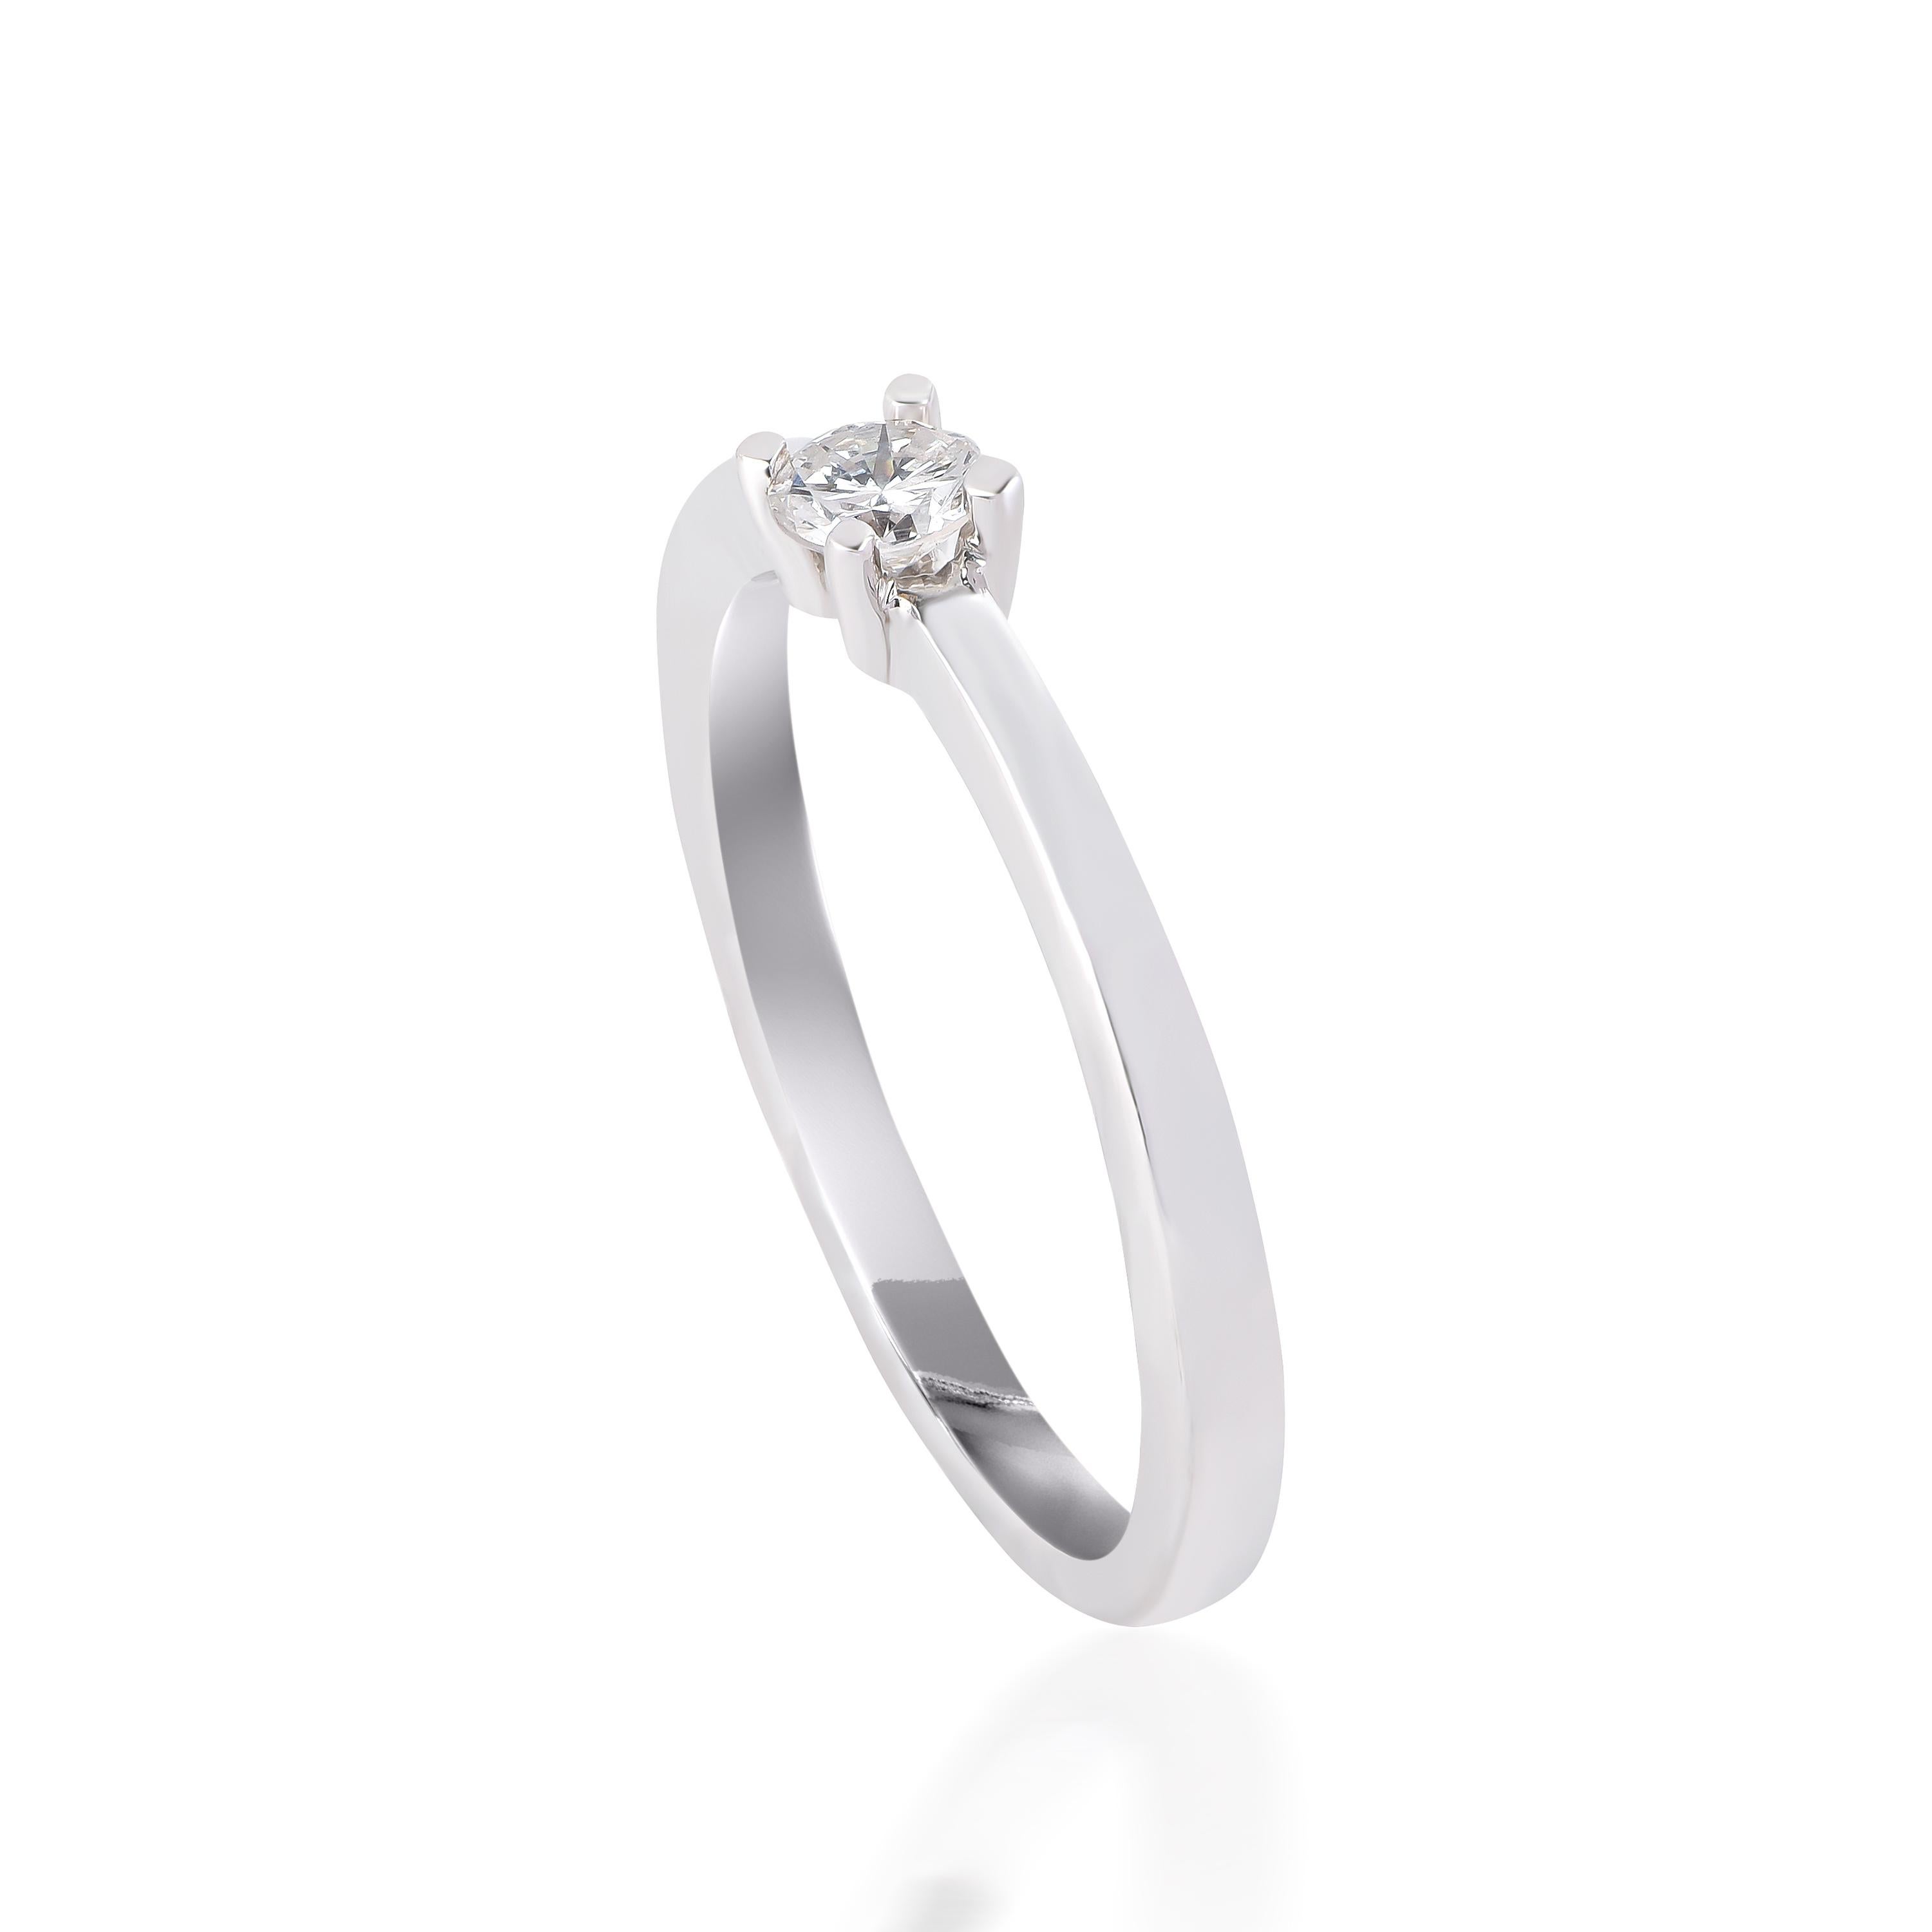 Handcrafted by our experts in 18-karat white gold and studded with 1 brilliant cut diamond set in prong setting. The diamonds are graded G-H Color, SI2 Clarity.